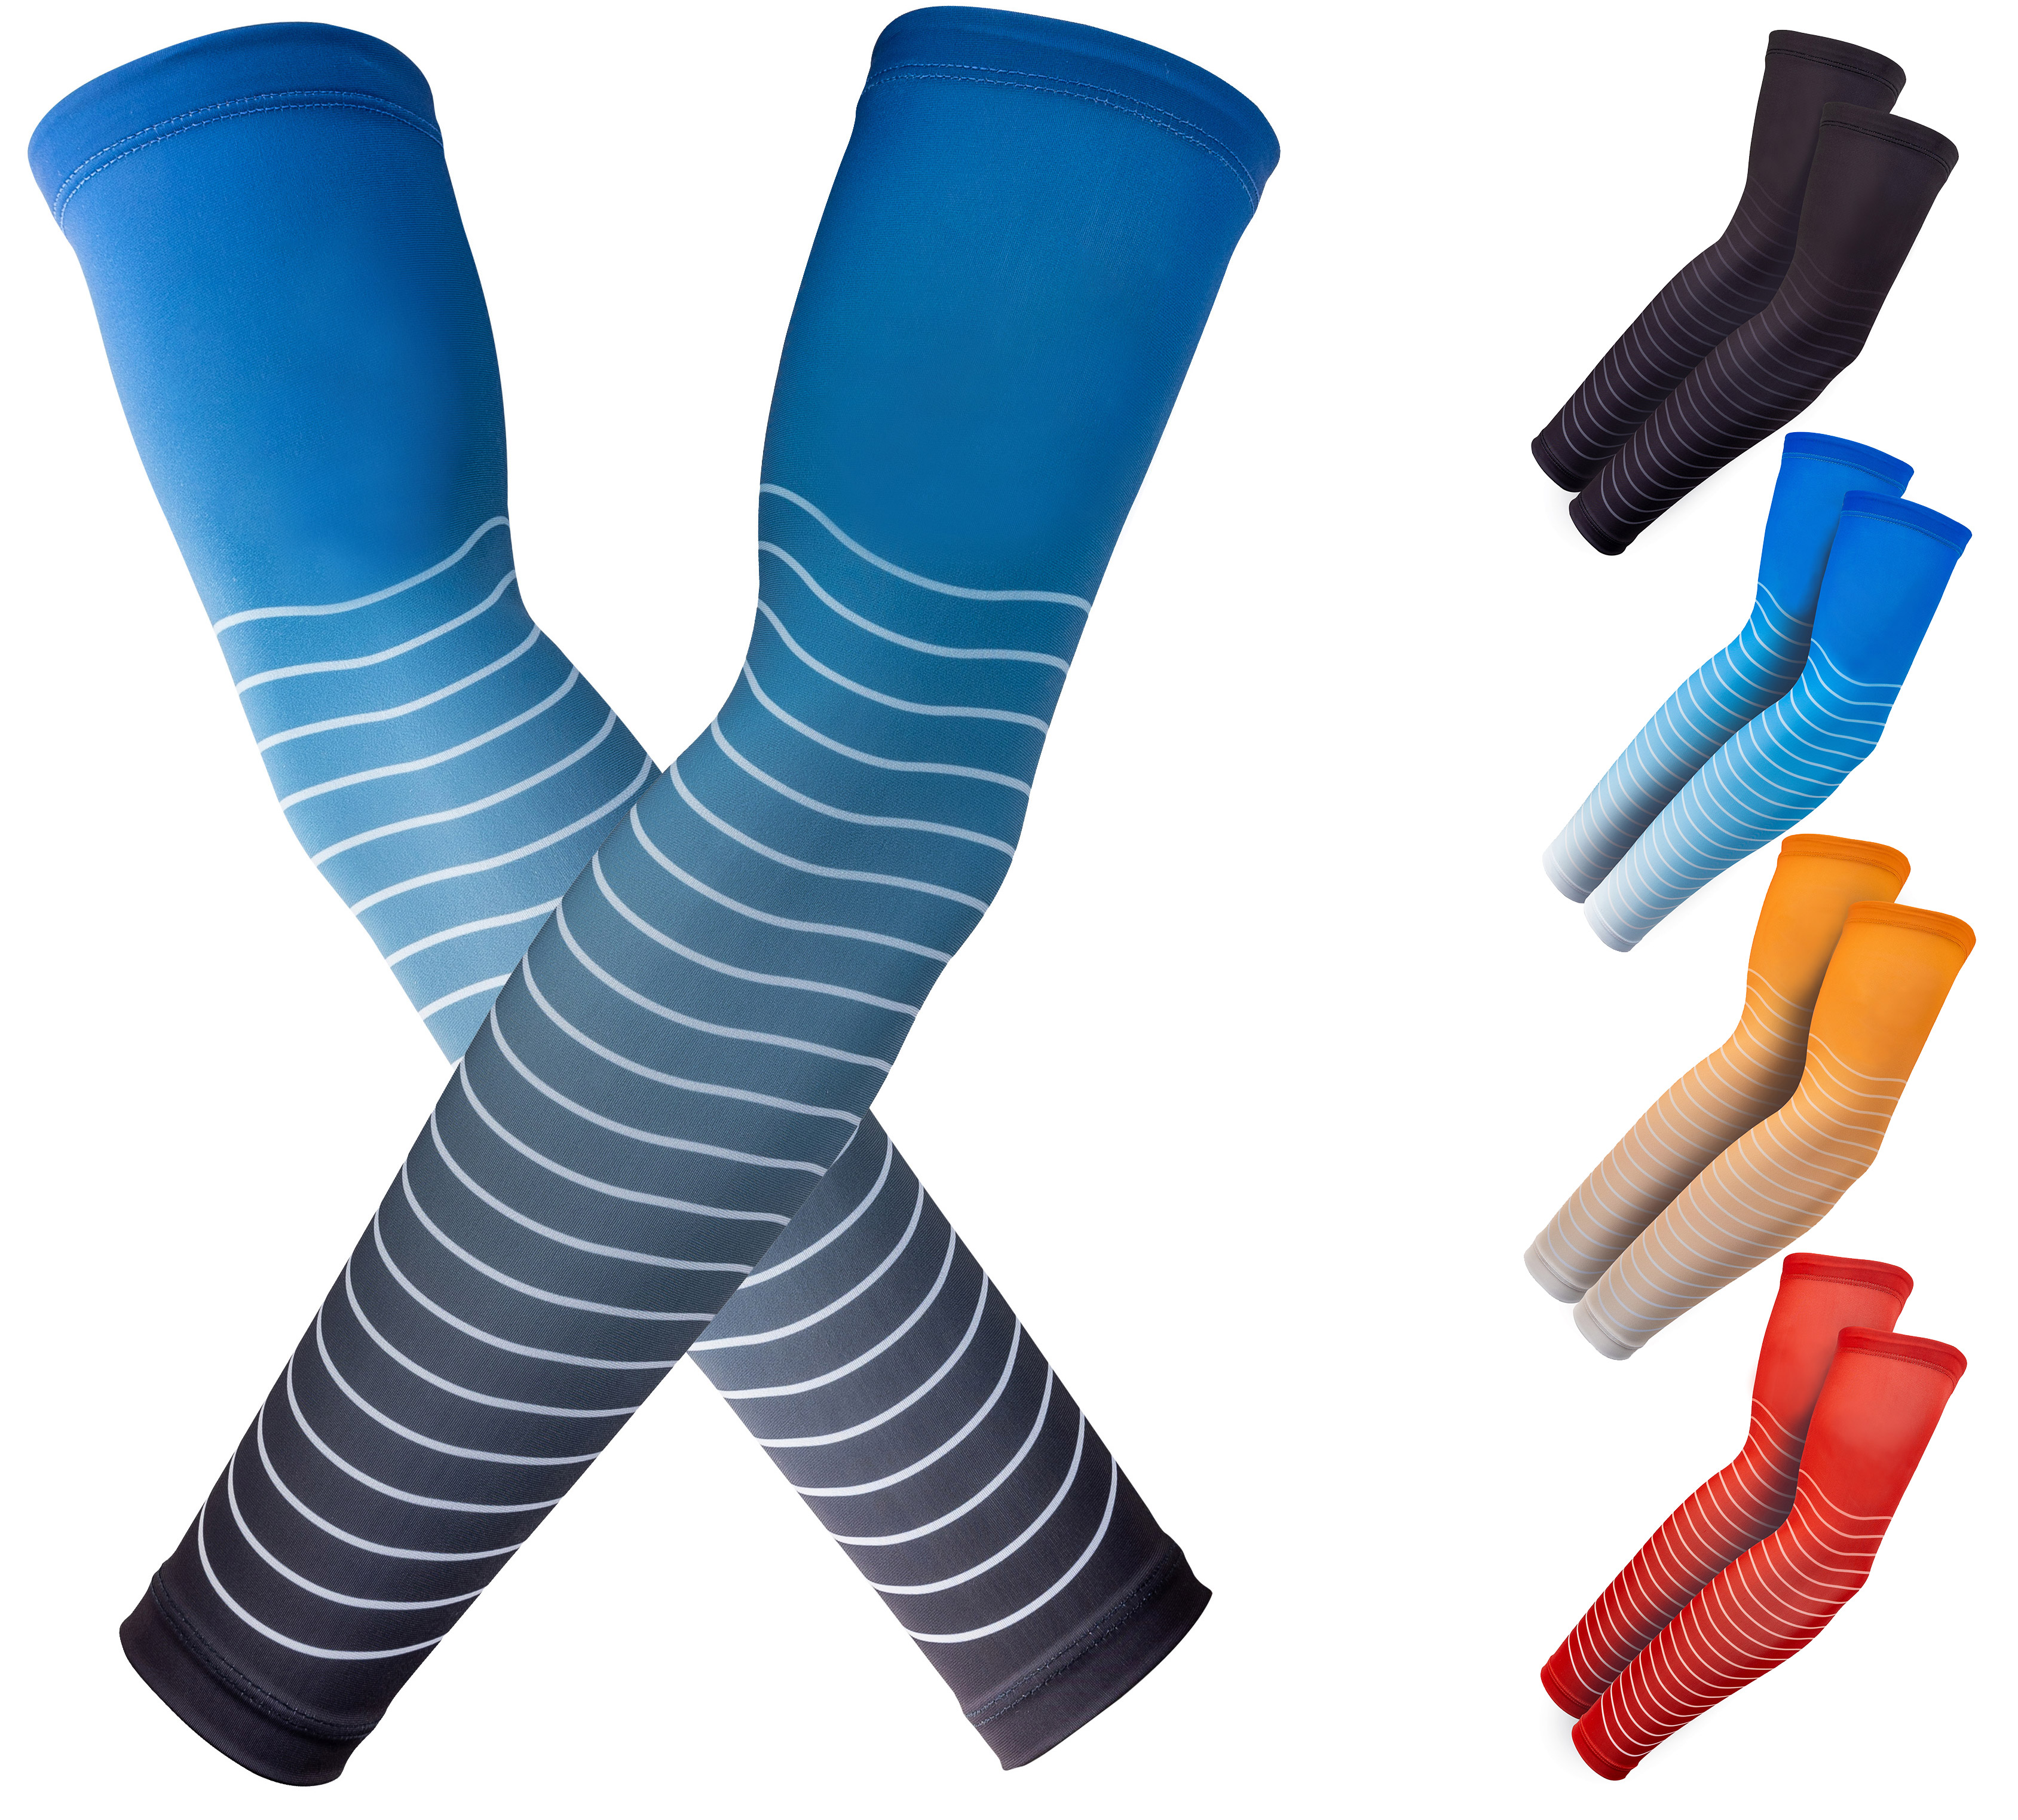 Compression arm sleeves for sports